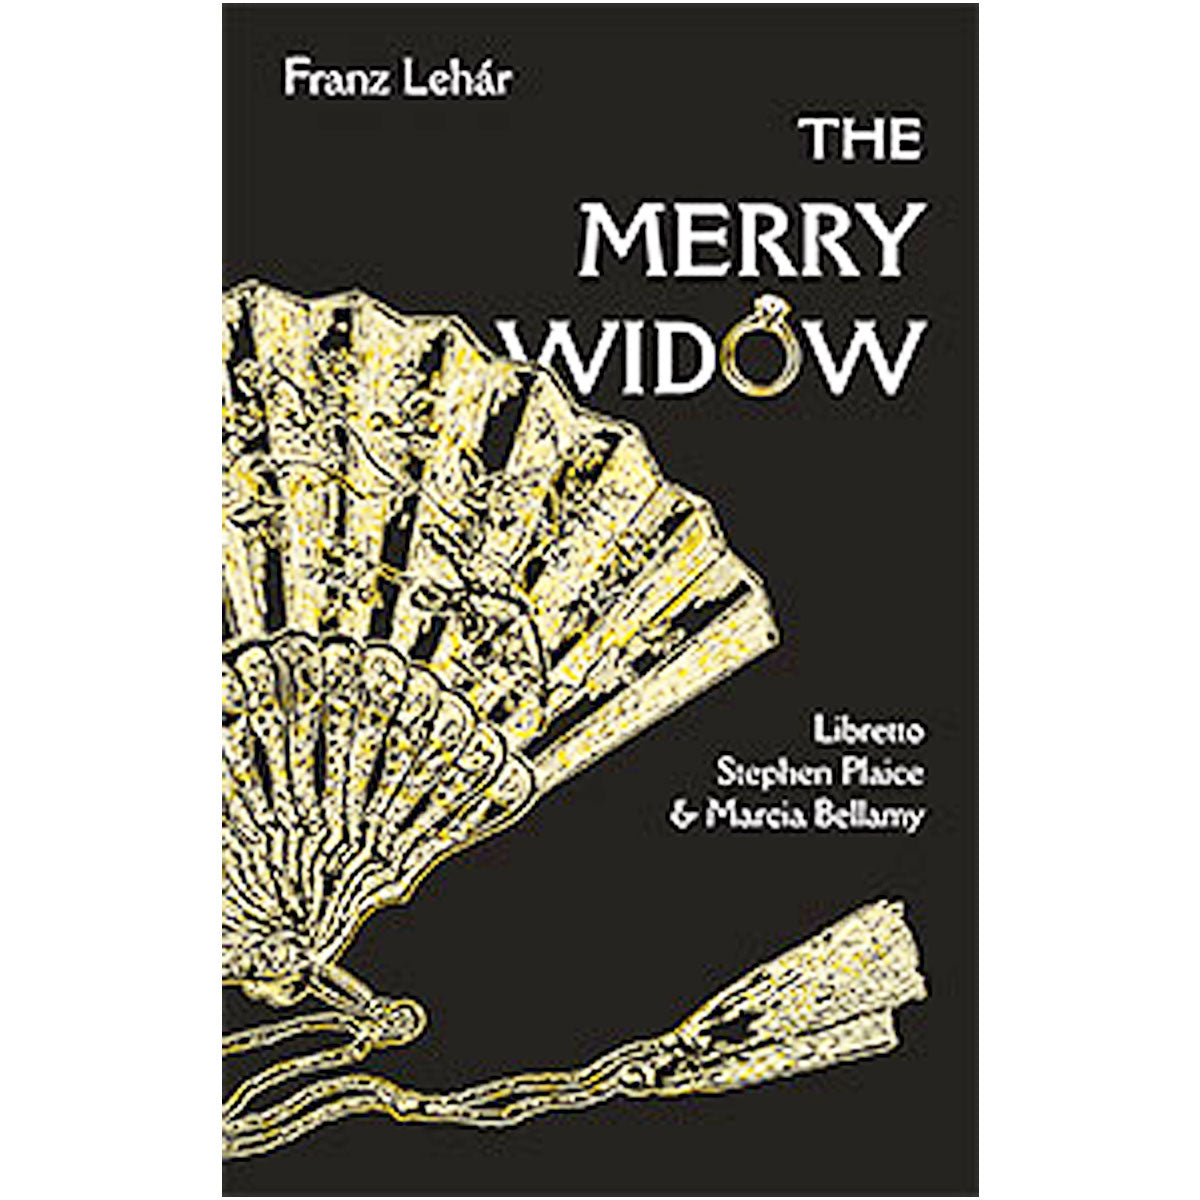 The Merry Widow Libretto by Stephen Plaice & Marcia Bellamy